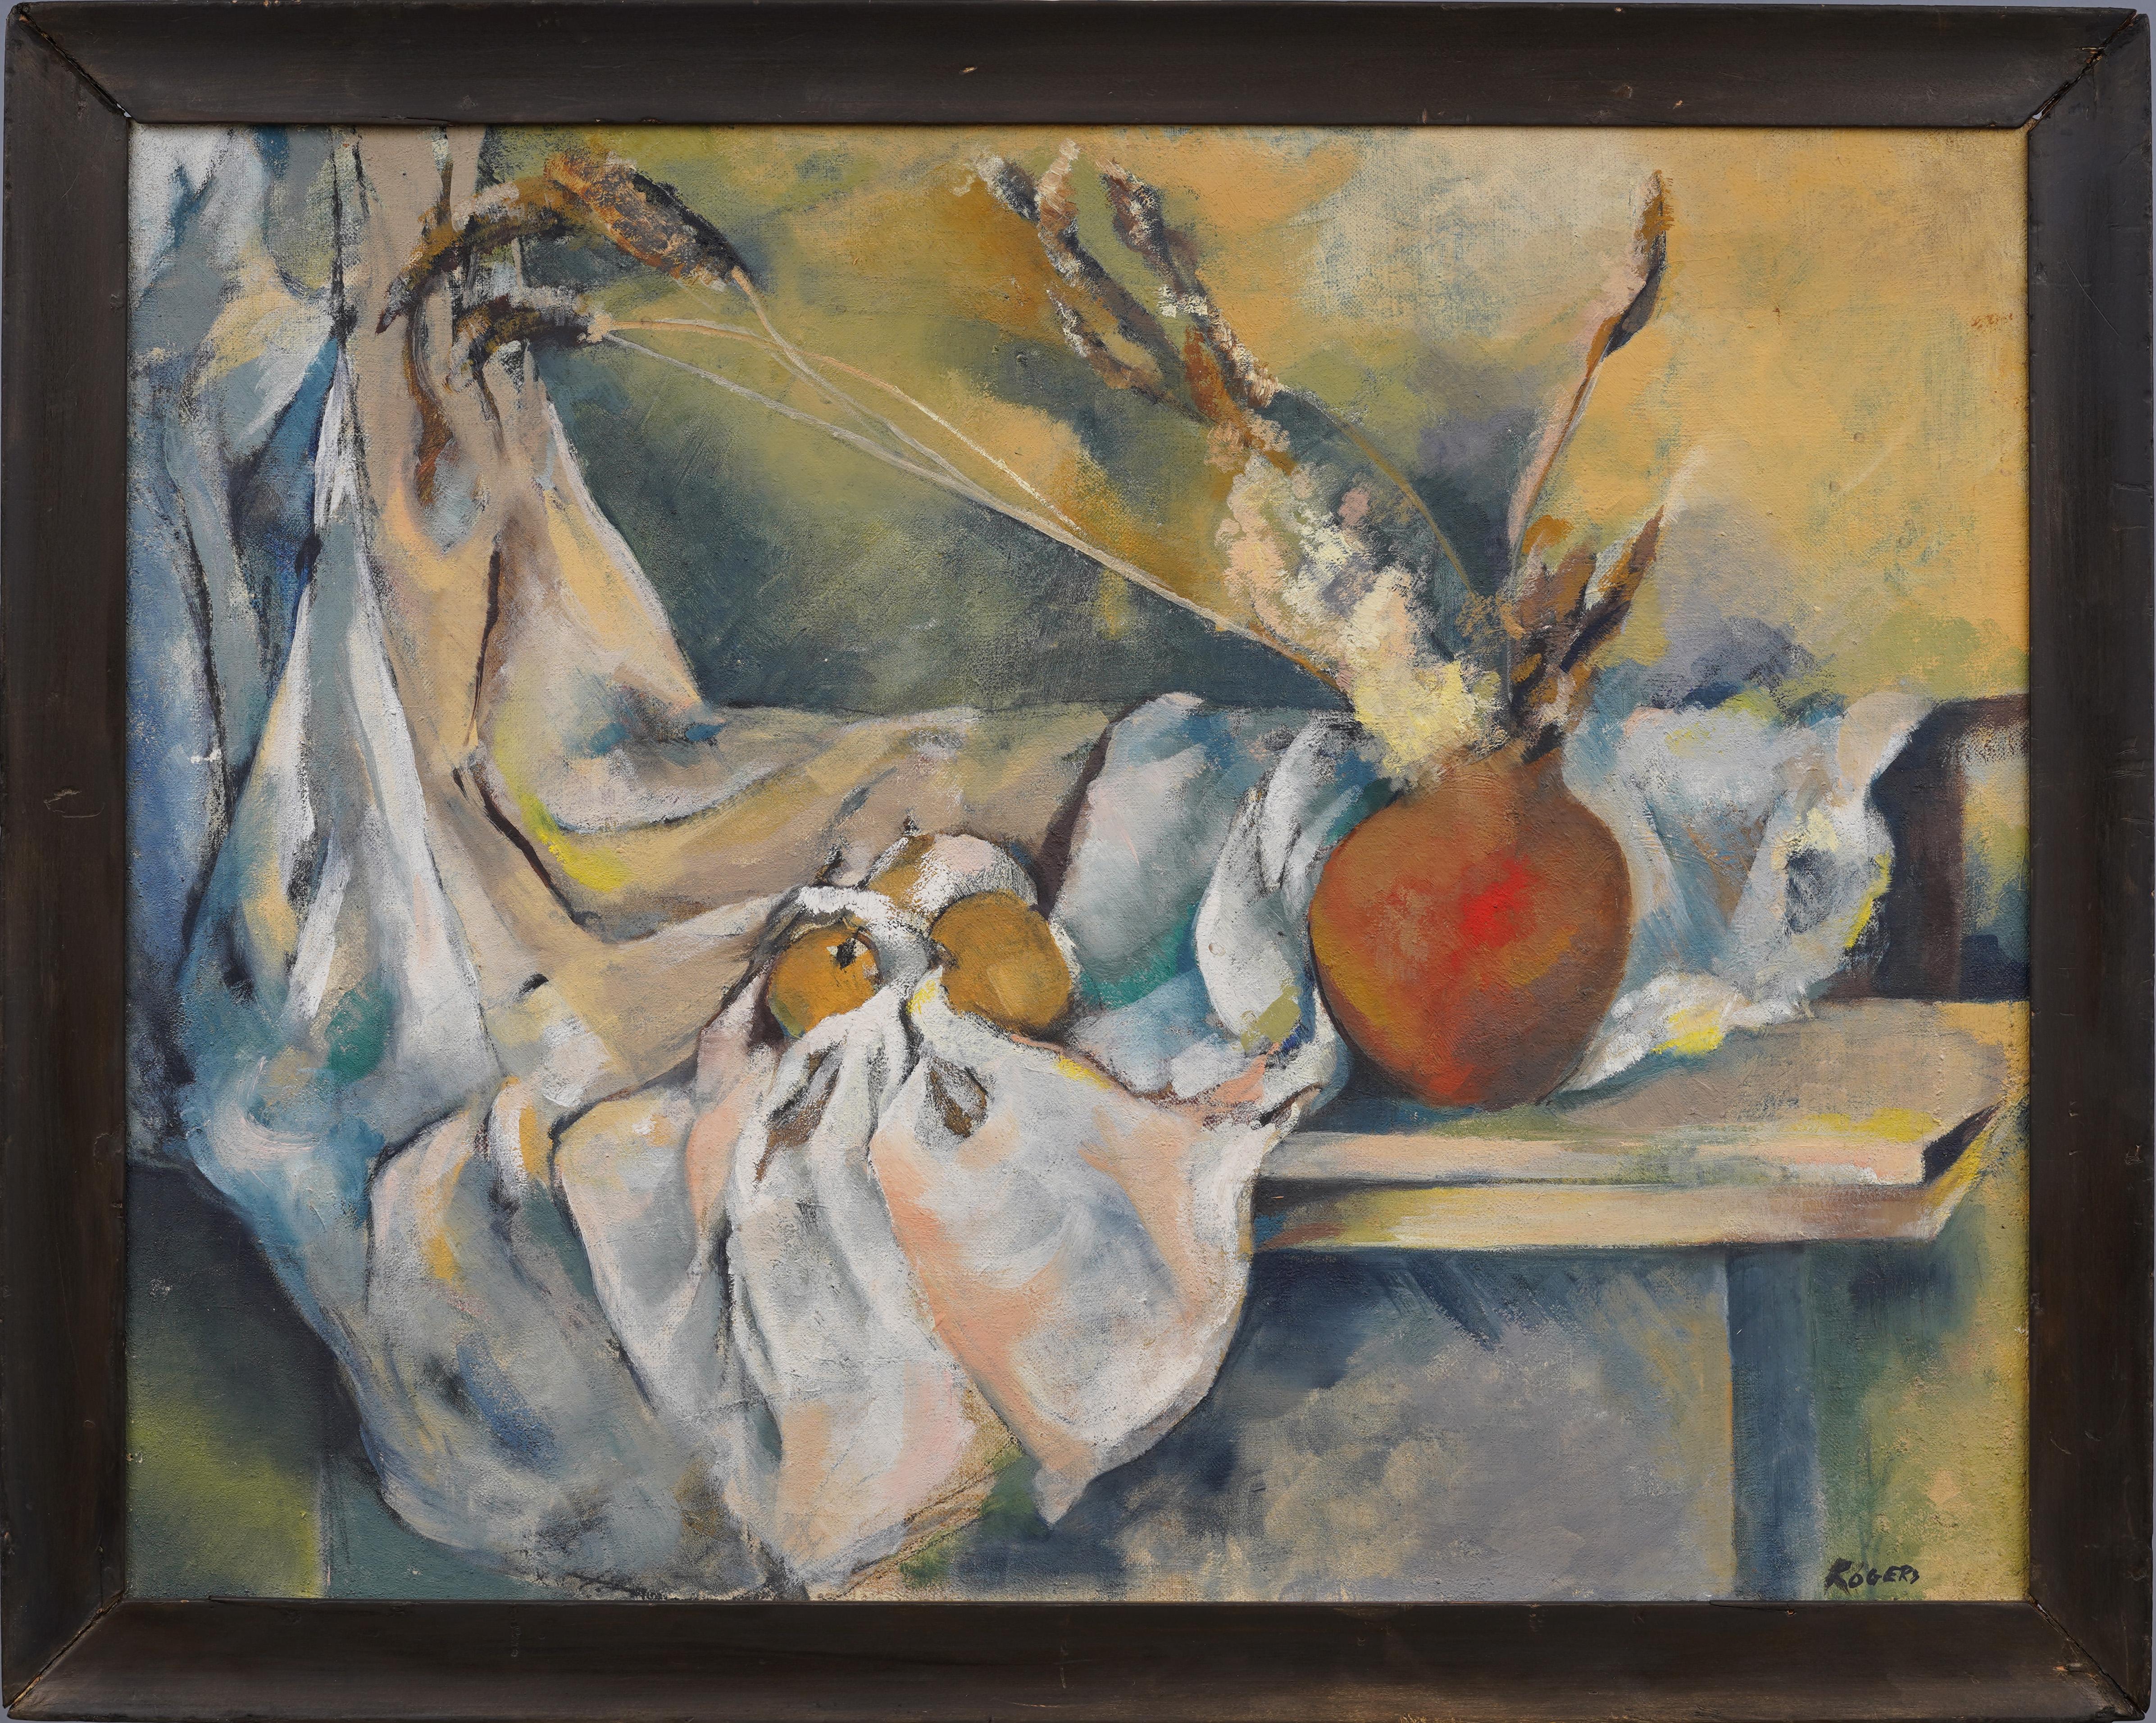 Nicely painted fruit still life.  Oil on canvas.  Framed.  Signed.